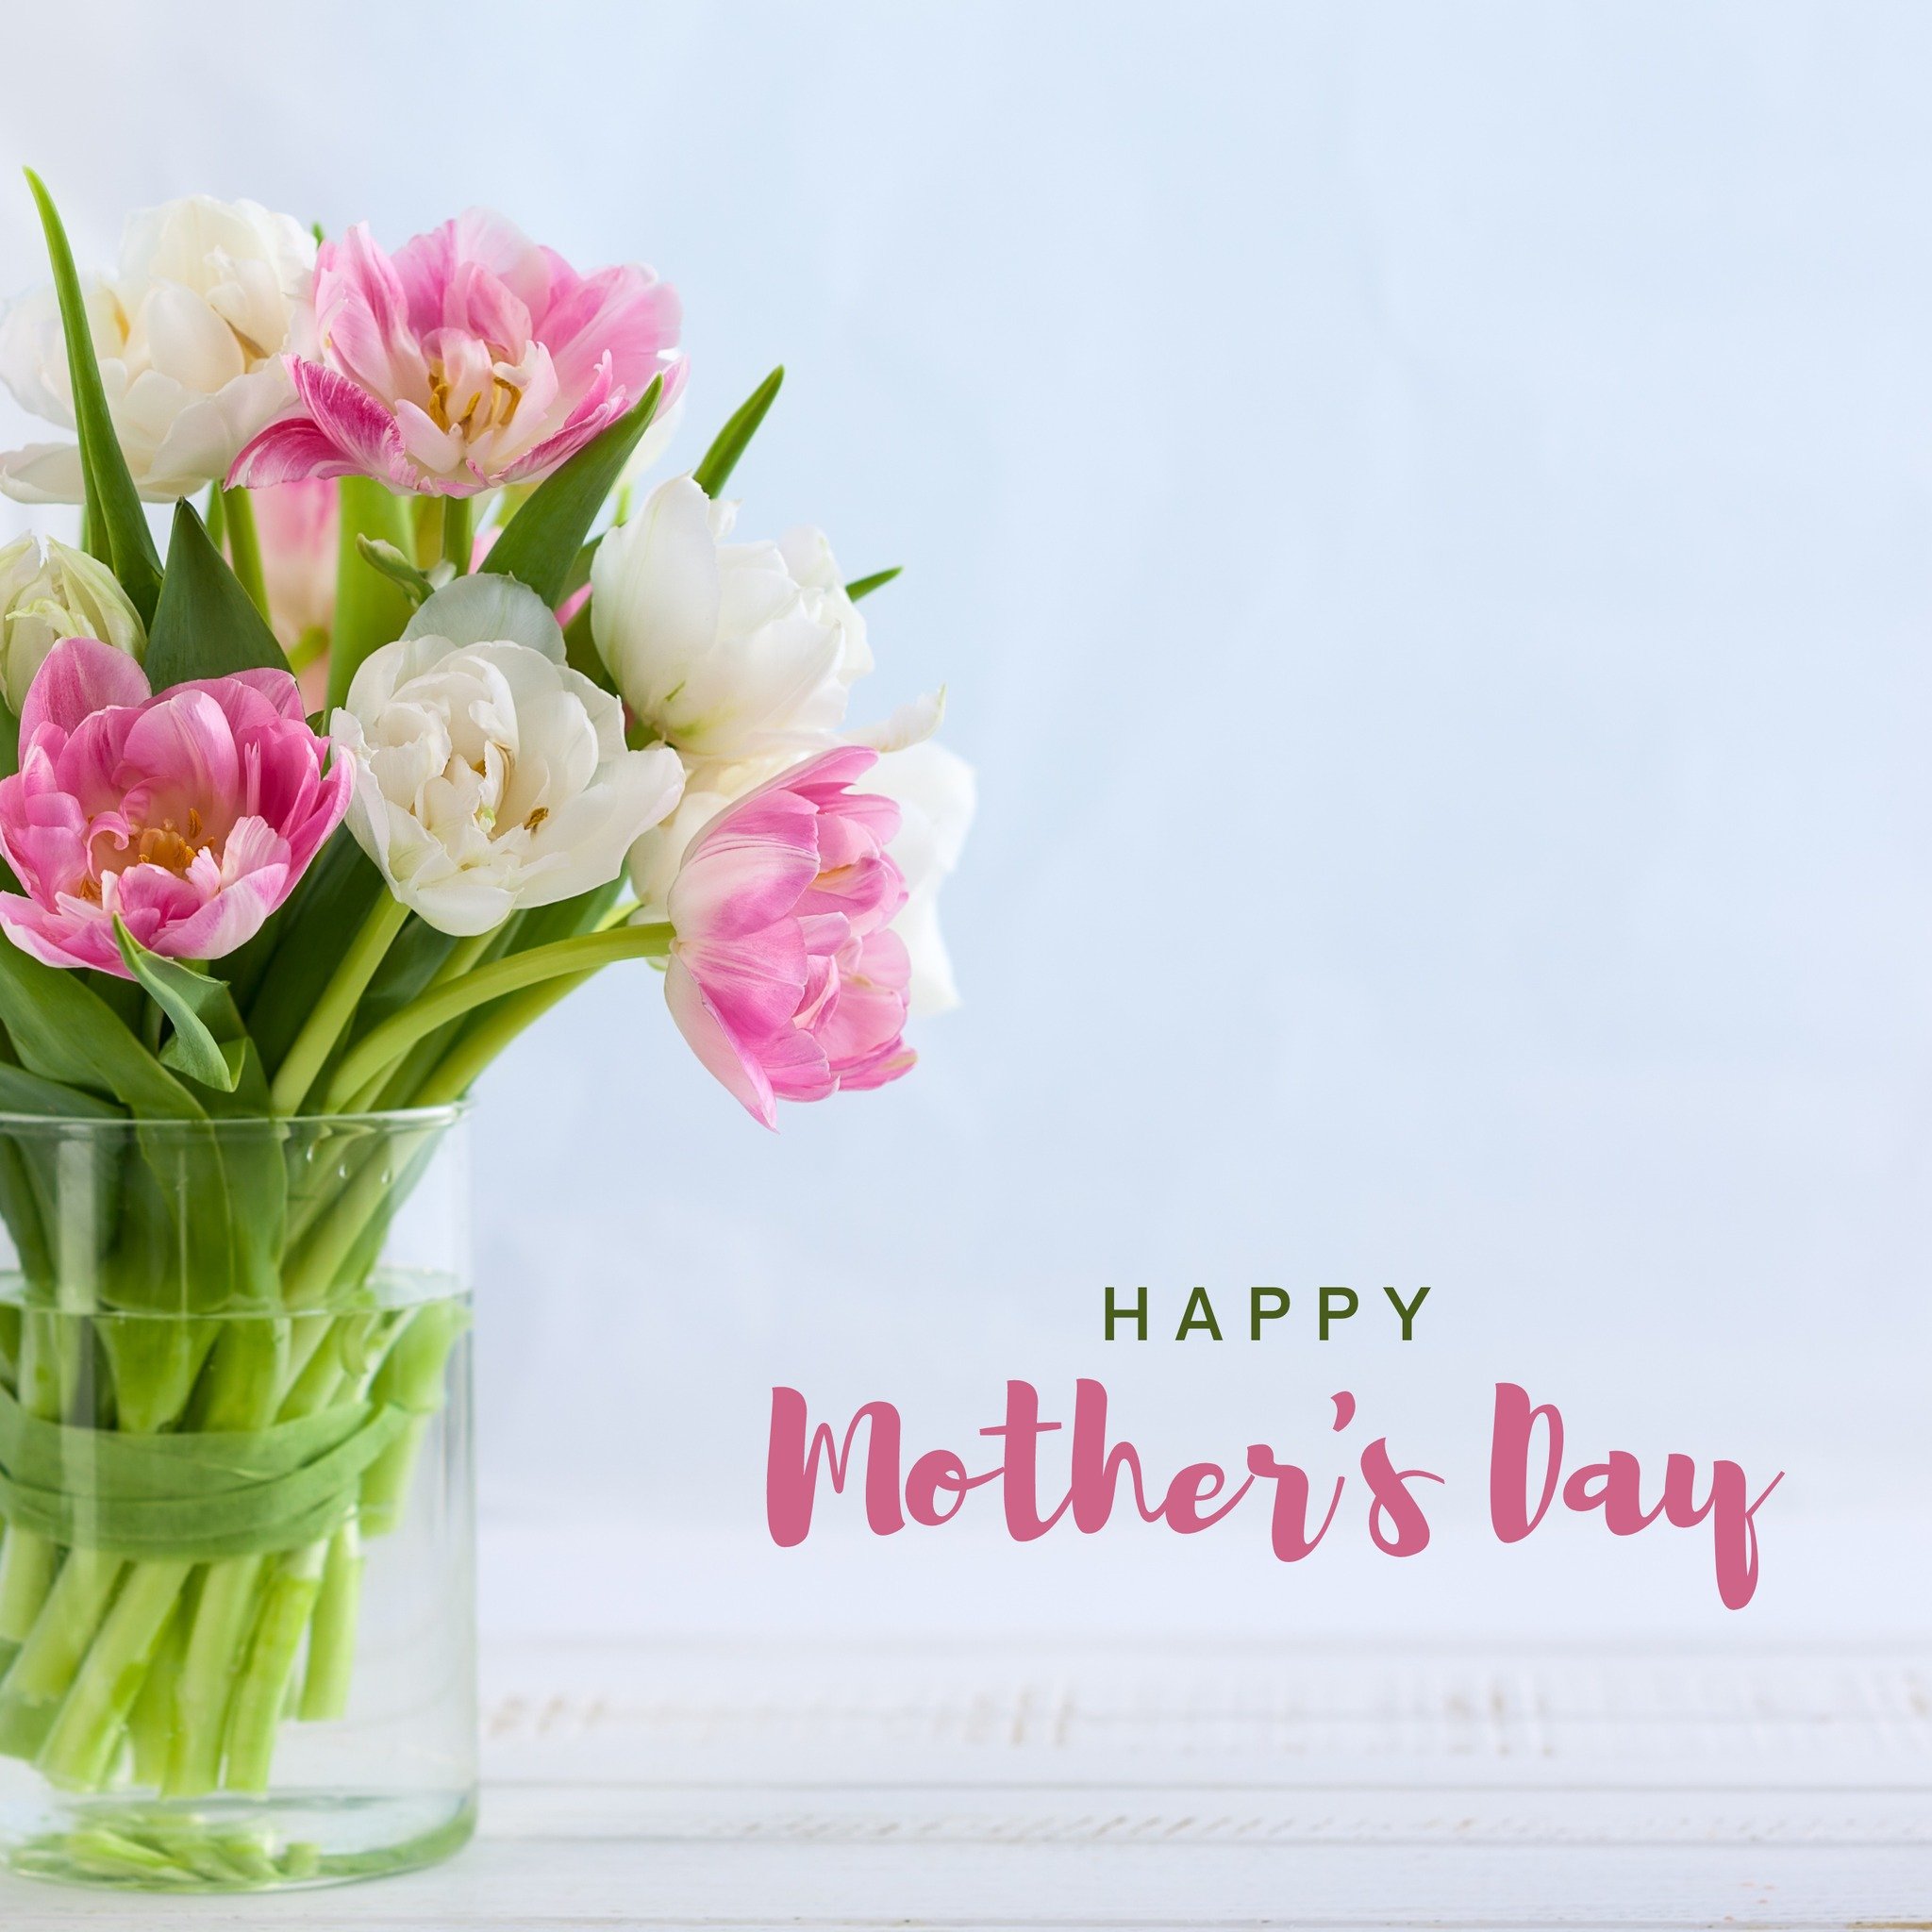 💐 Happy Mother's Day! 💐 

Today, we celebrate the incredible women who fill our lives with love, laughter, and endless support. 

To all the moms, grandmothers, and mother figures out there, thank you for your strength, wisdom, and unwavering devot